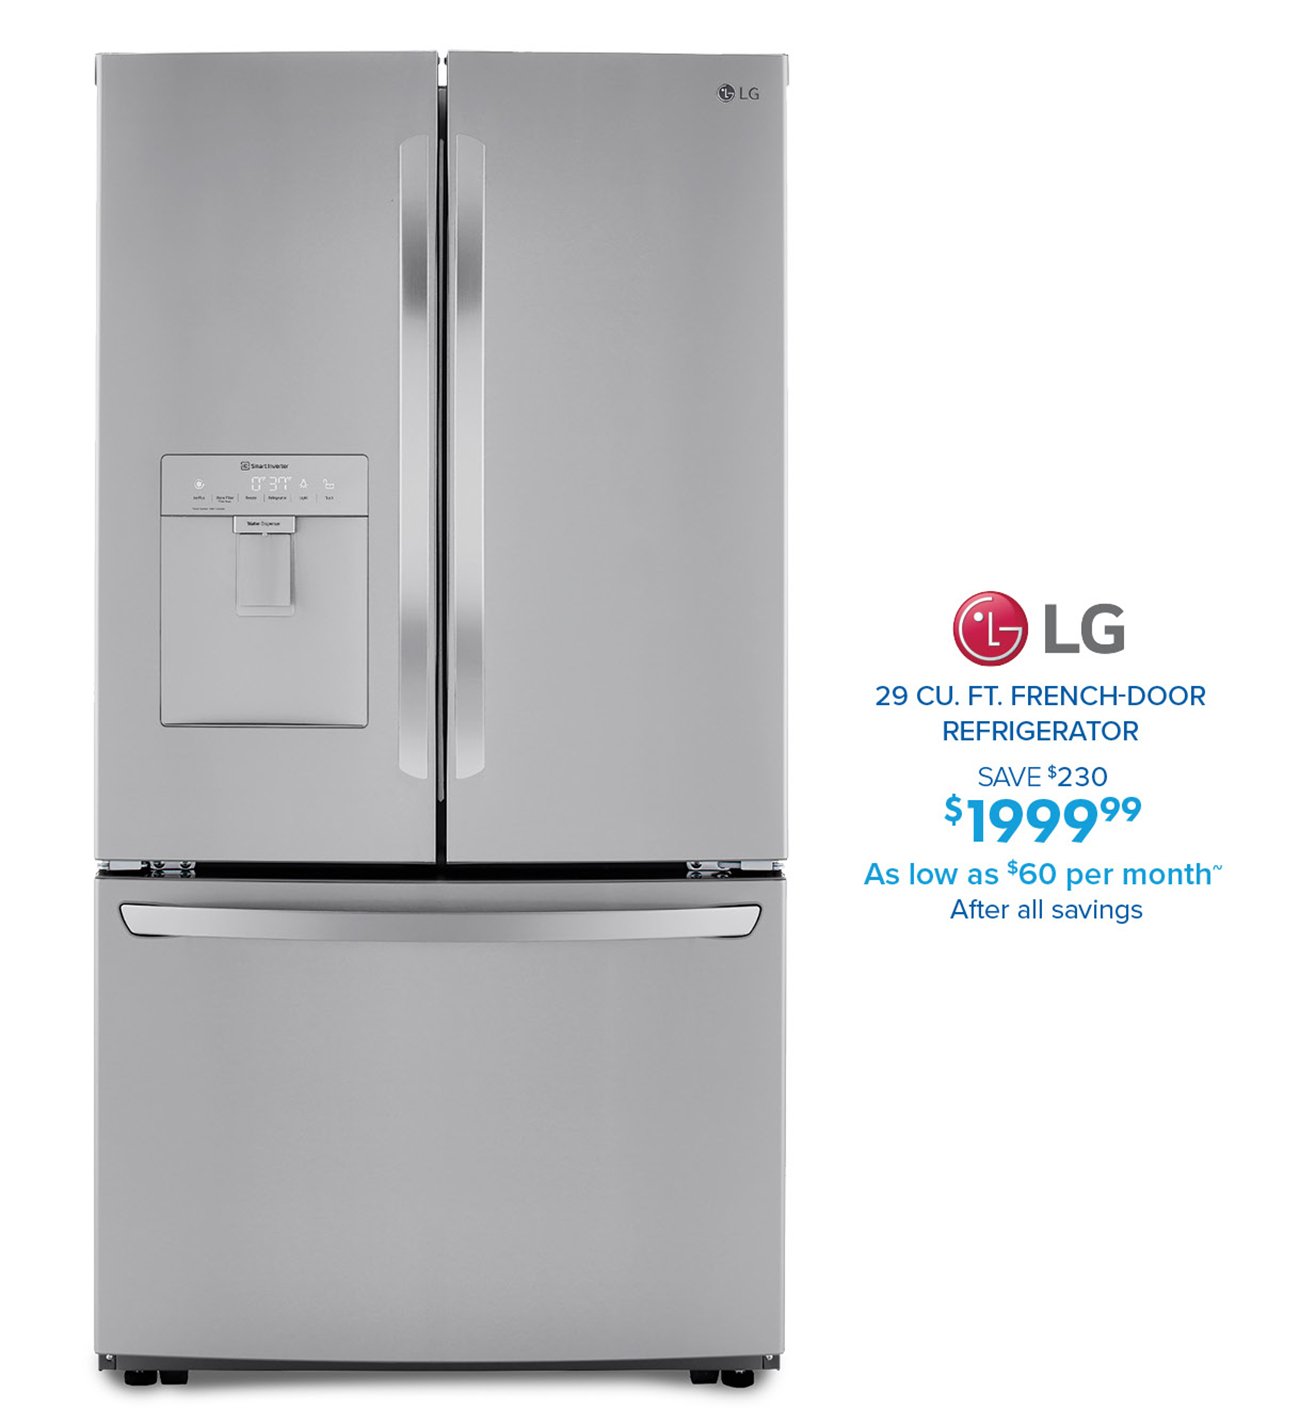 @LG 29 CU. FT. FRENCH-DOOR REFRIGERATOR SAVE $230 $1999% As low as *60 per month After all savings 